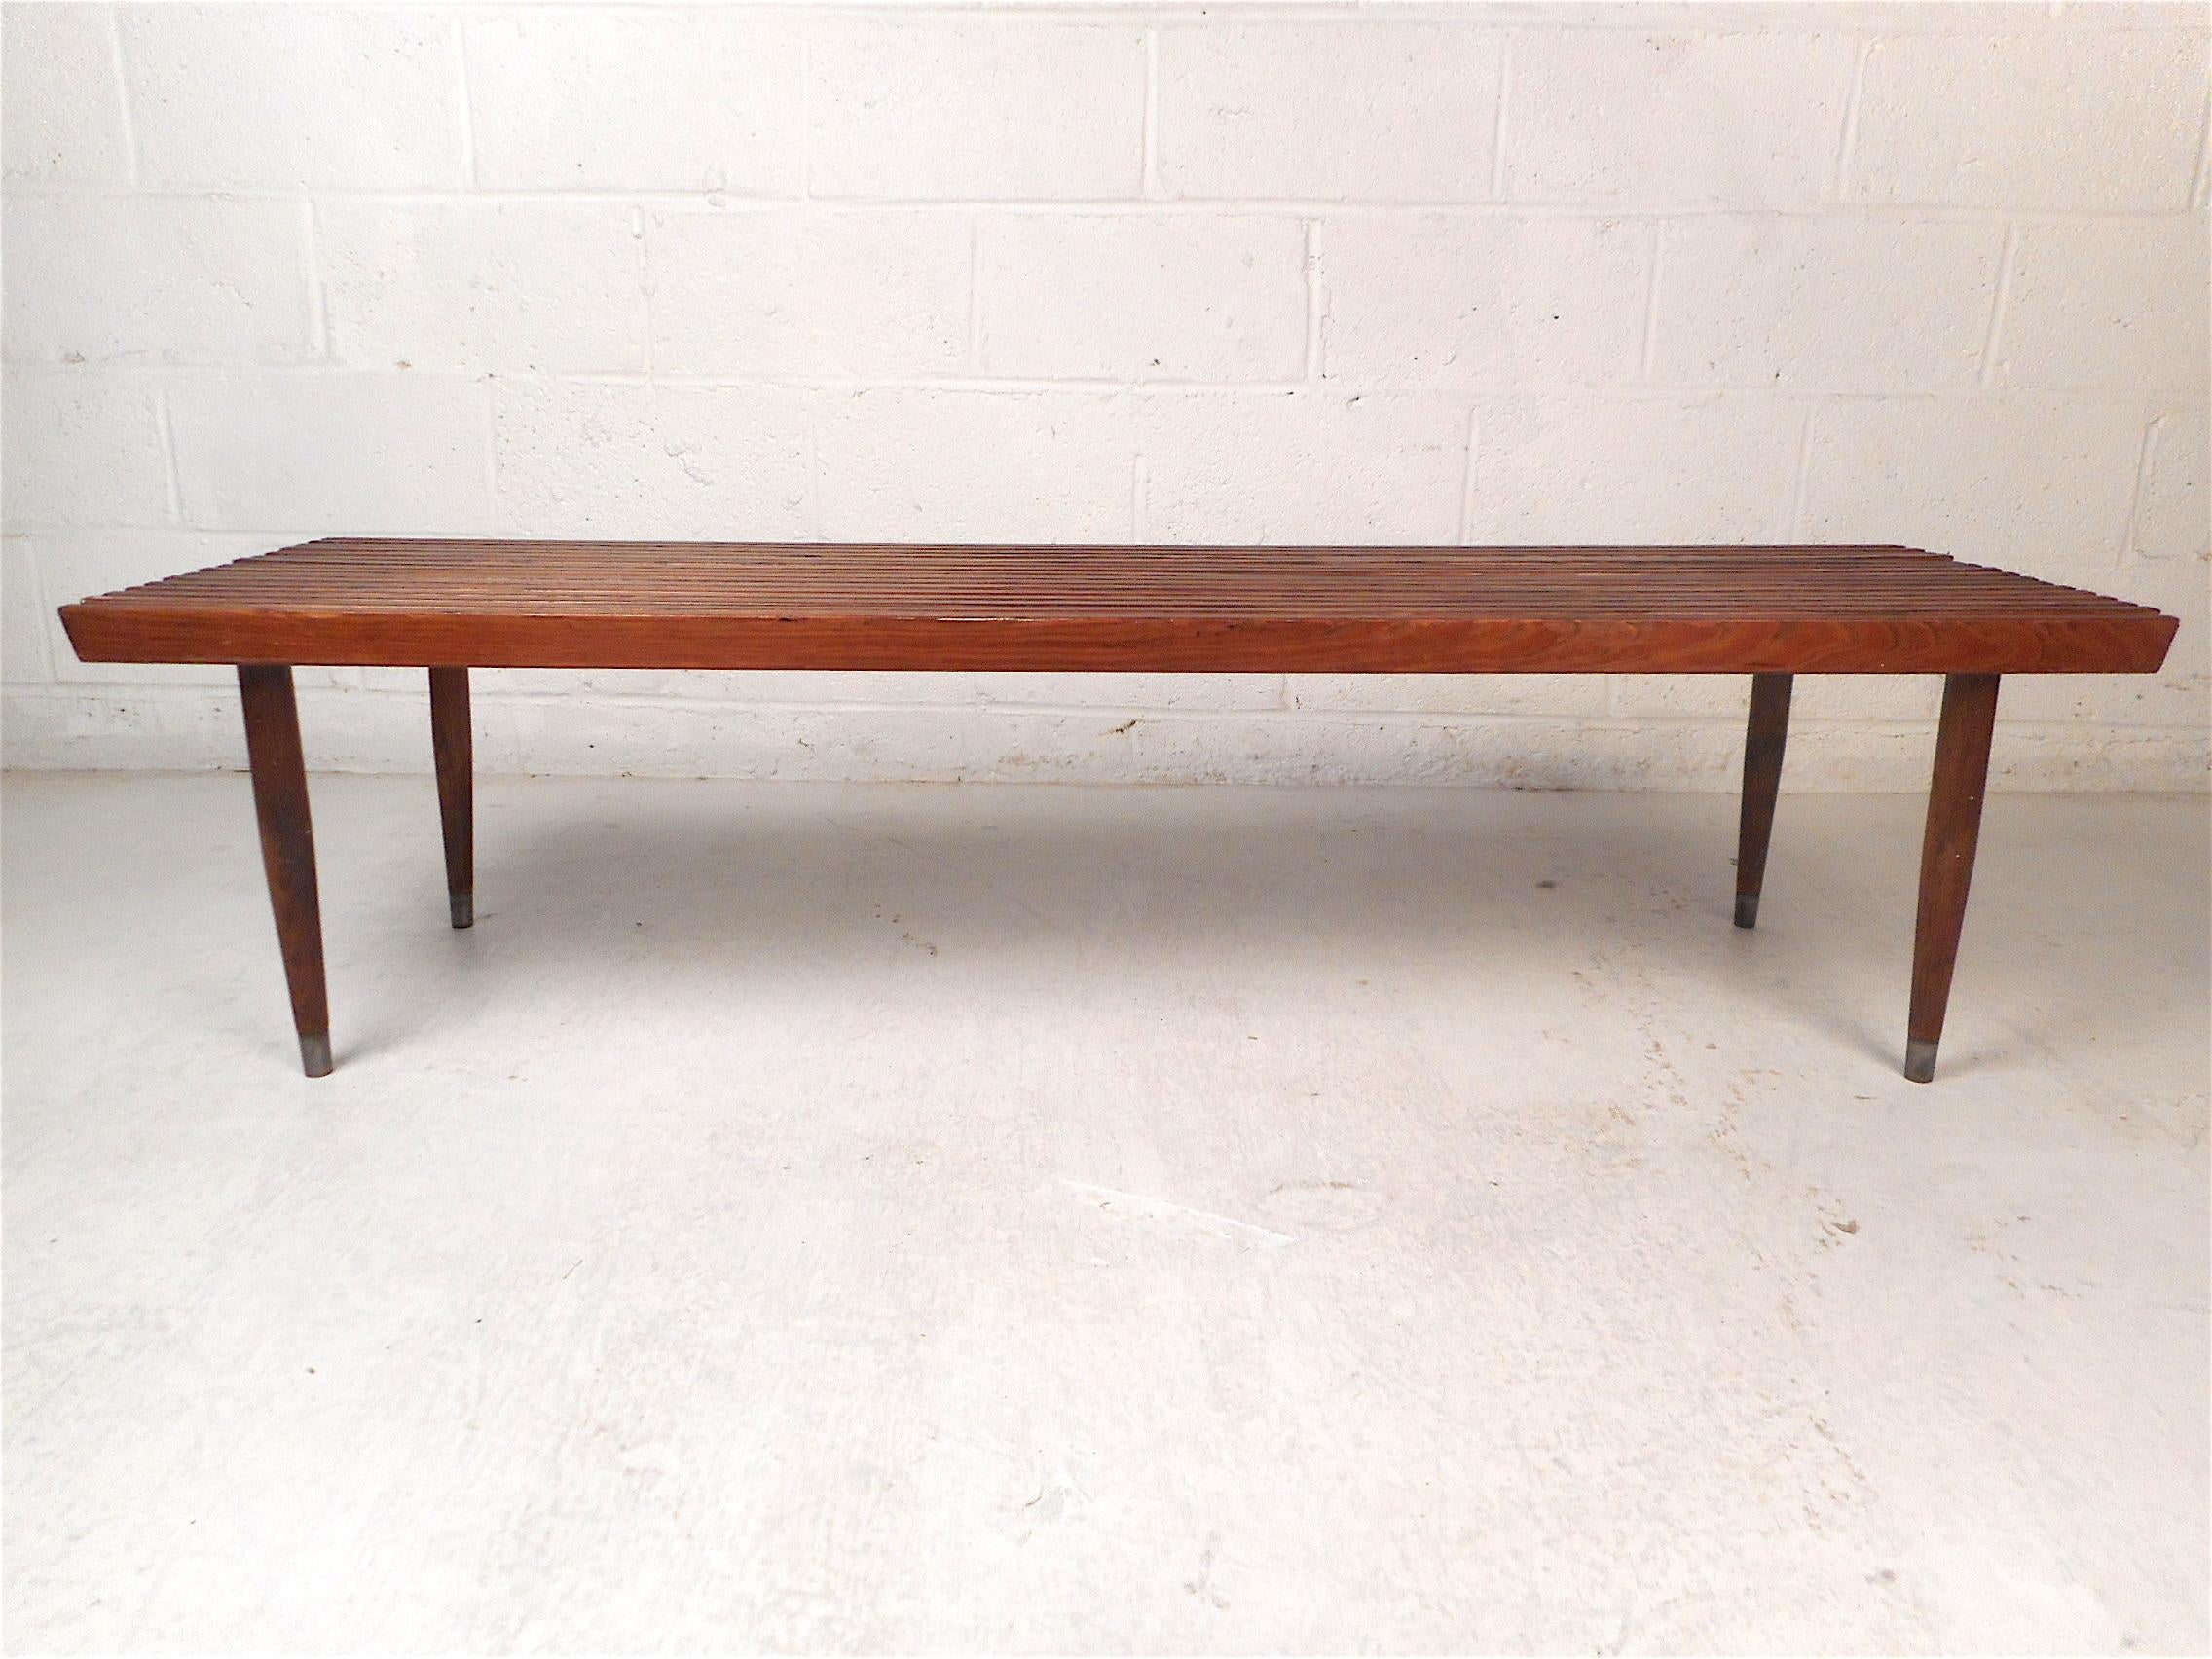 Stylish midcentury bench with a wood slat construction. Versatile design able to use for seating or as a coffee table. Nice design including tapered legs with brass sabots on their feet. Great addition to any modern interior (NJ or NY).